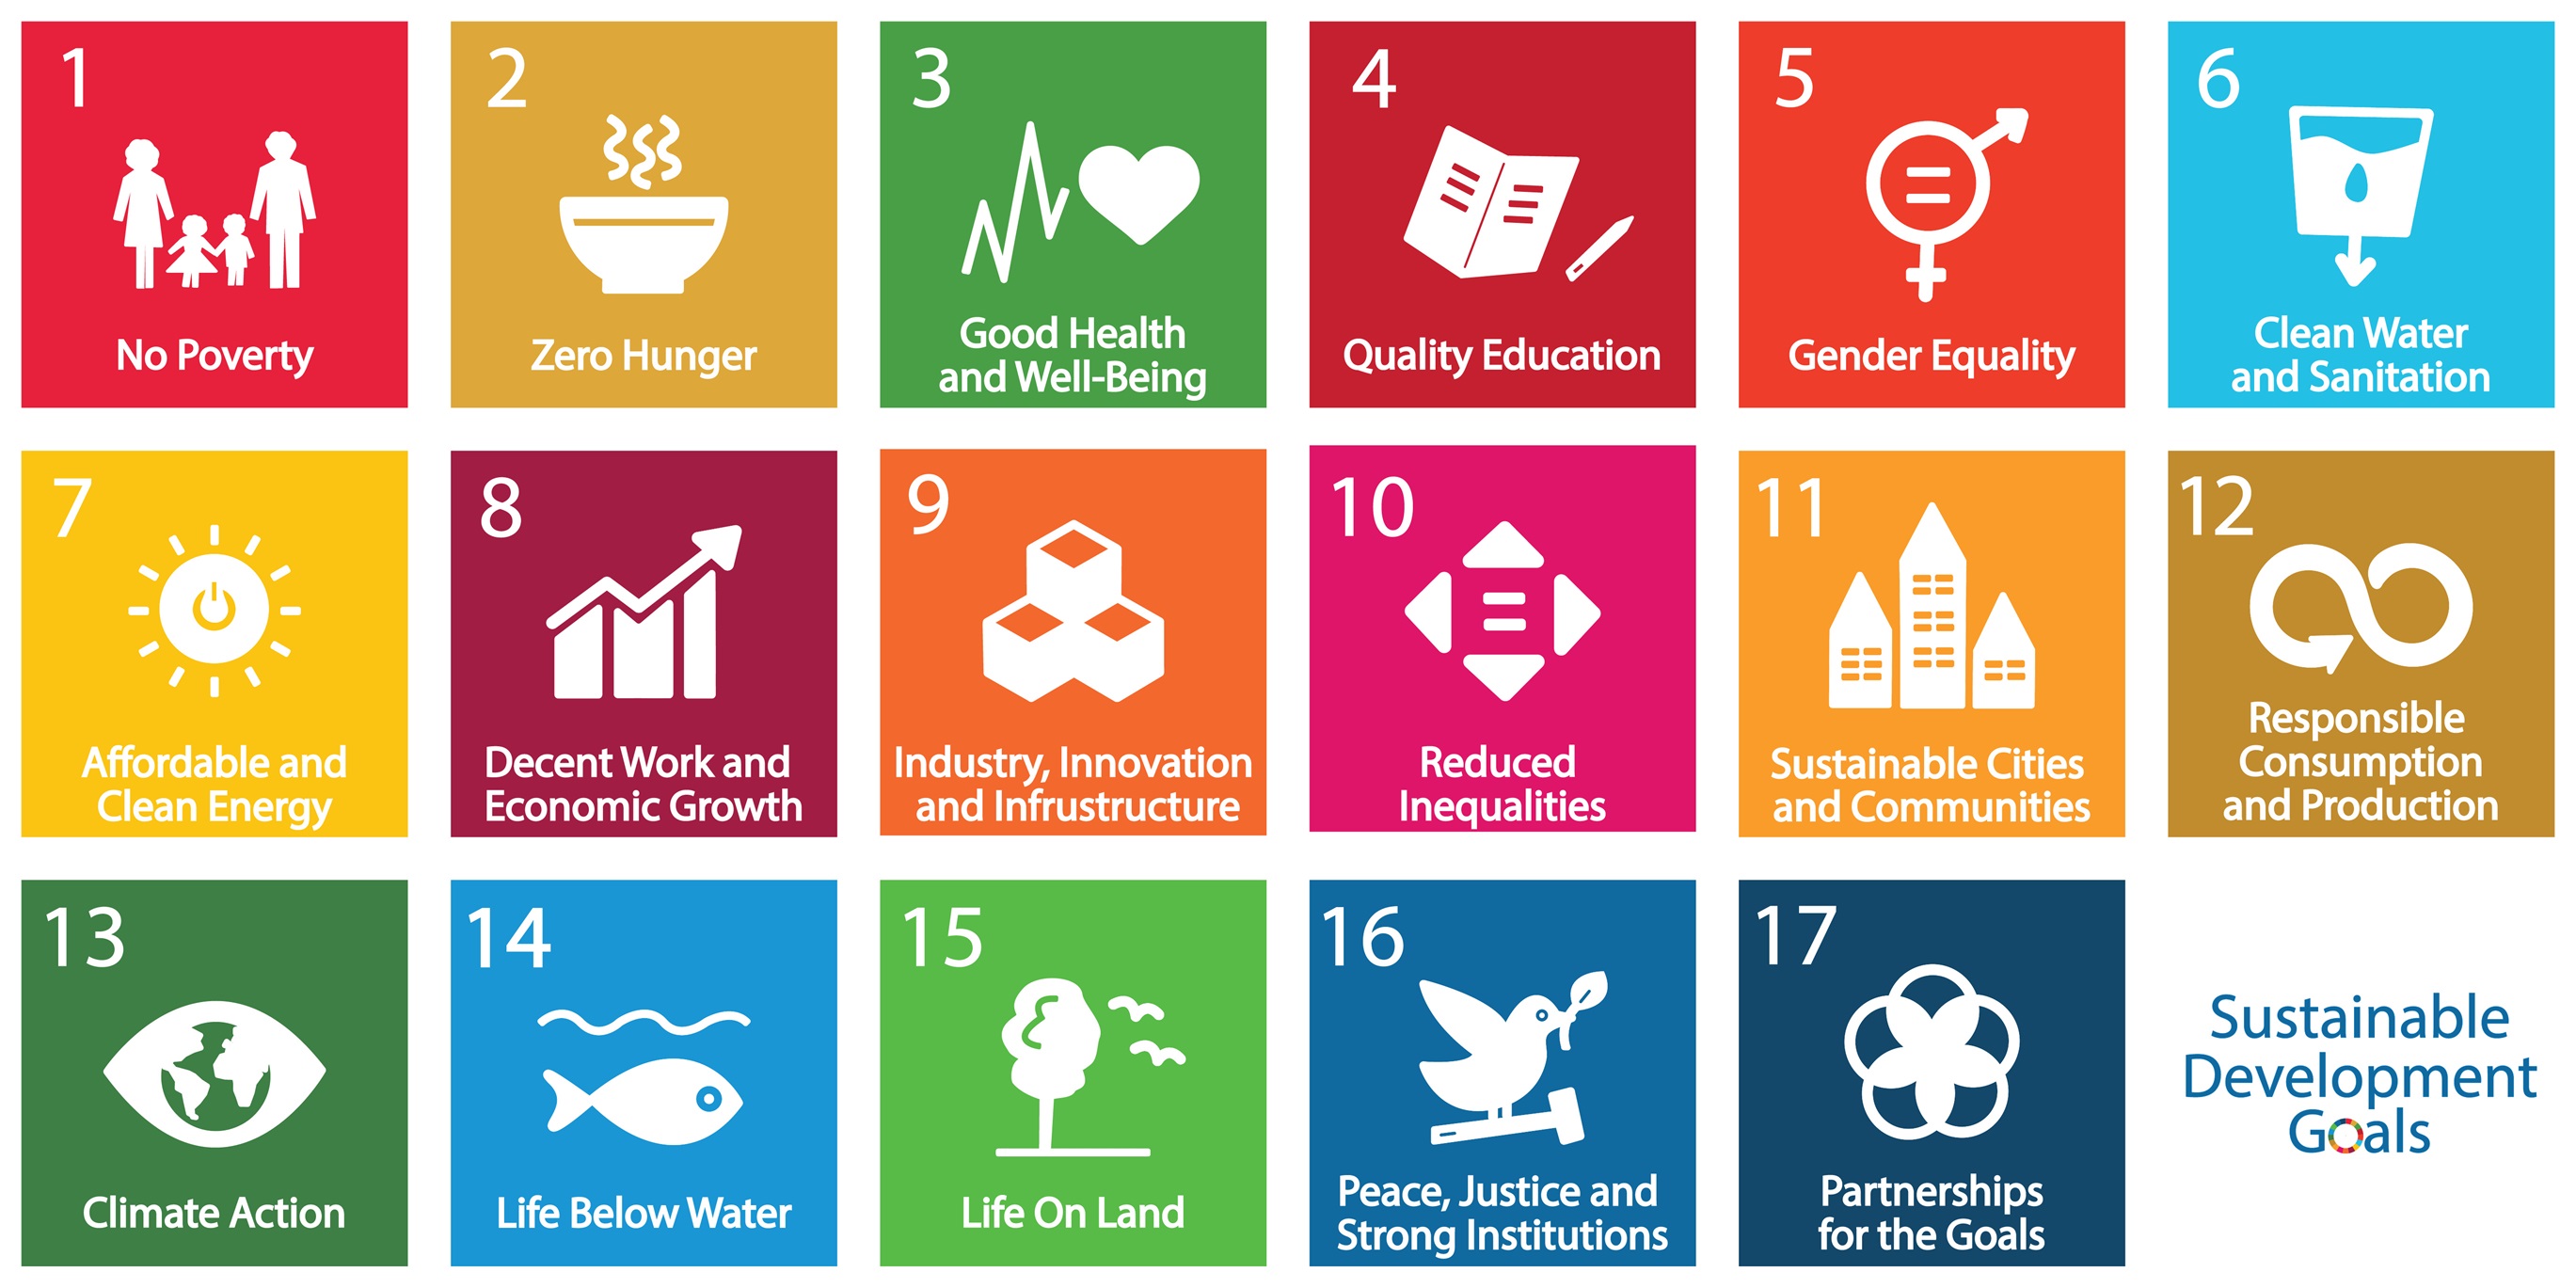 Supporting the UN’s Sustainable Development Goals